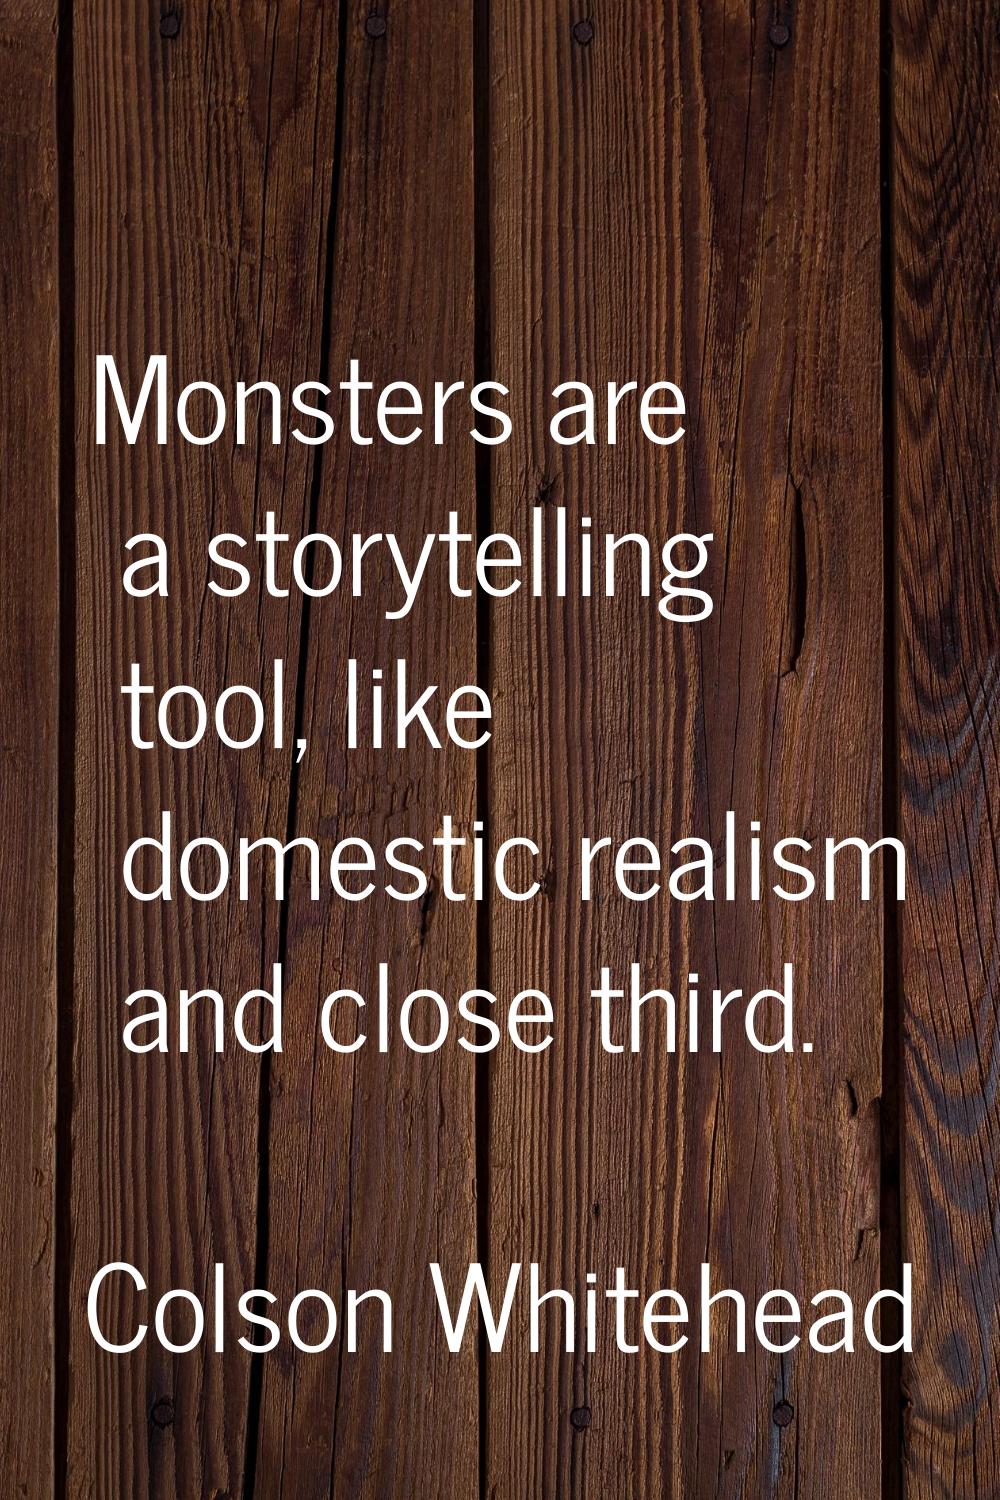 Monsters are a storytelling tool, like domestic realism and close third.